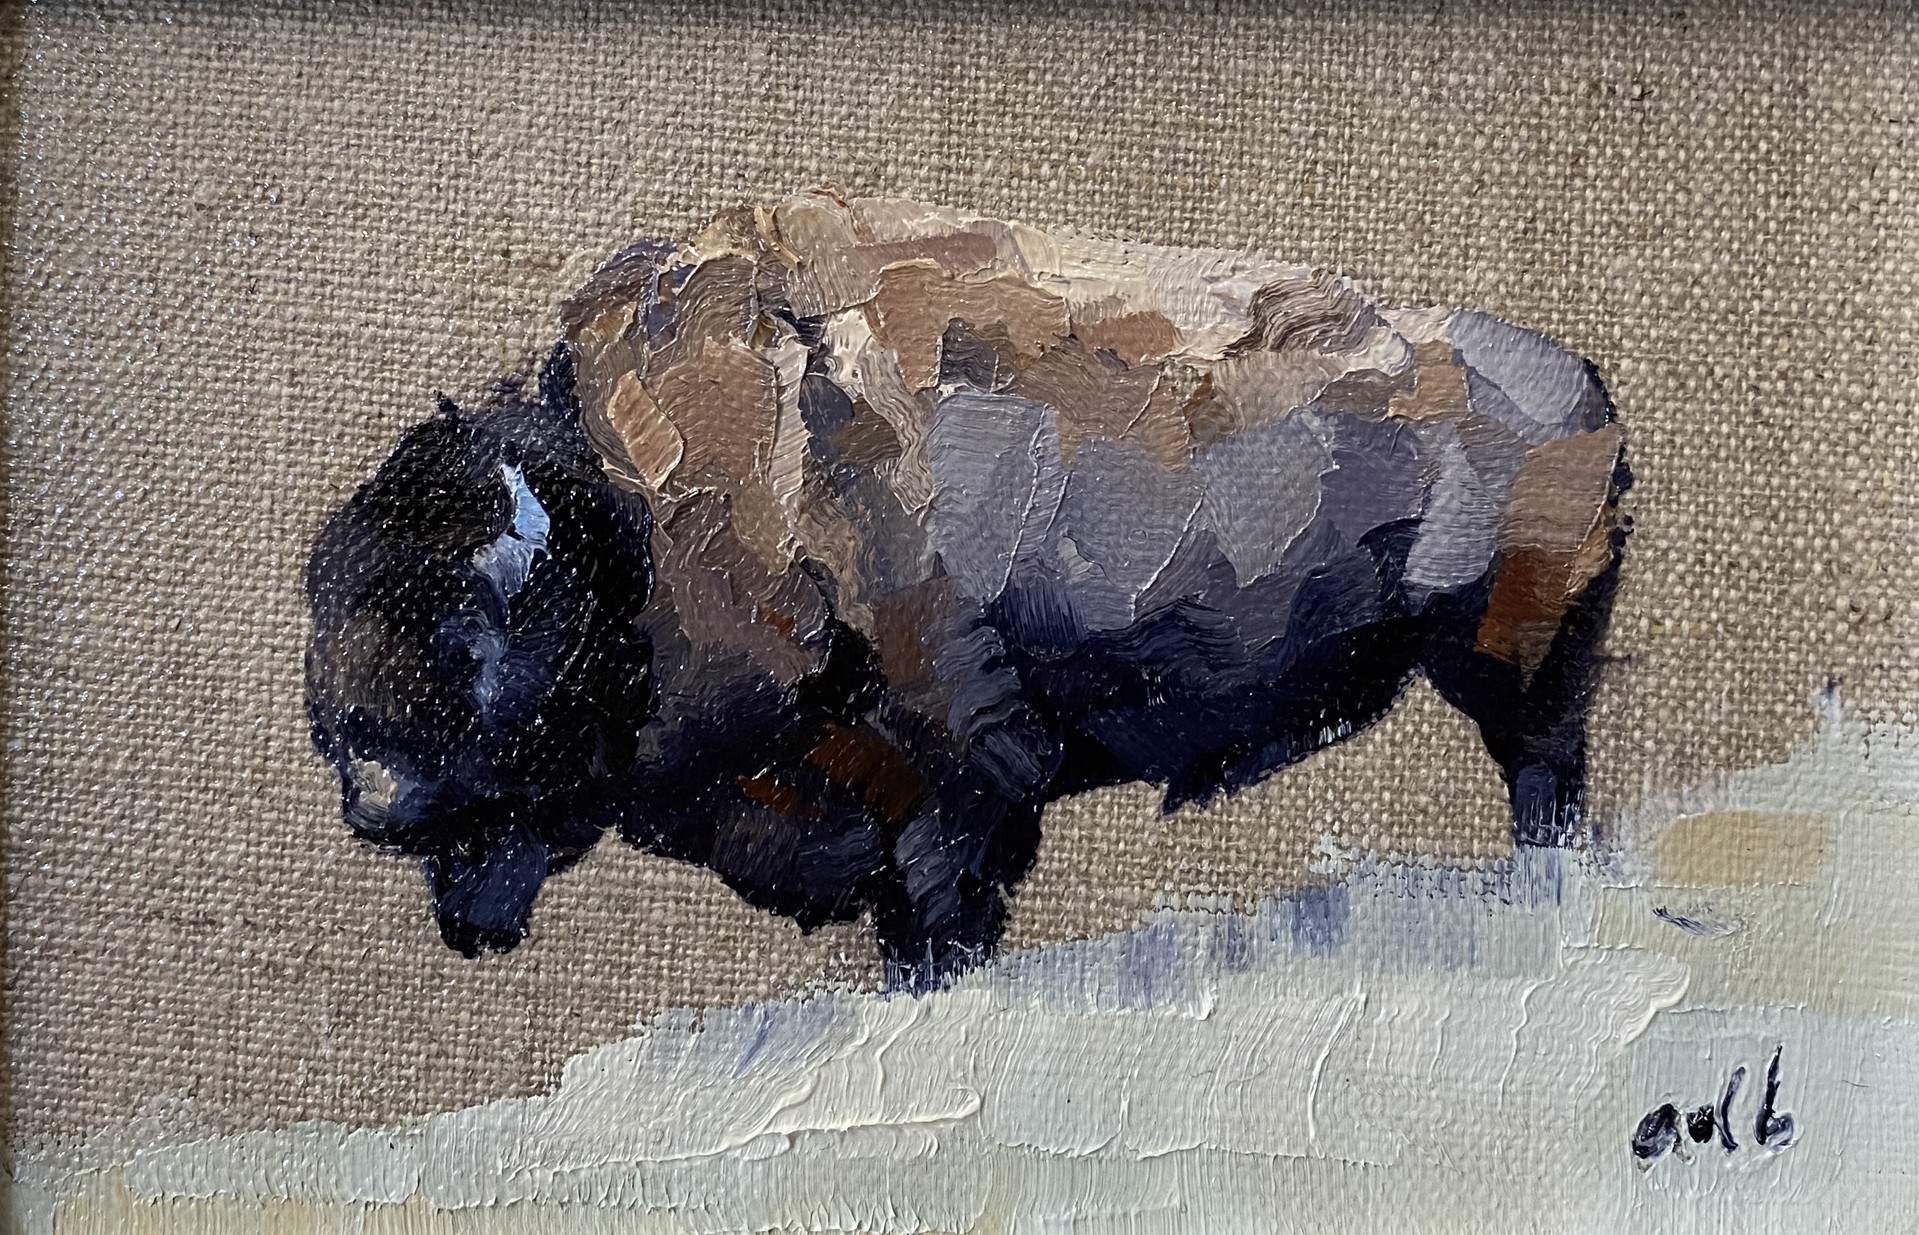 Original Oil Painting Of A Bison Standing Profile On A Snowy Hill, By Amber Blazina